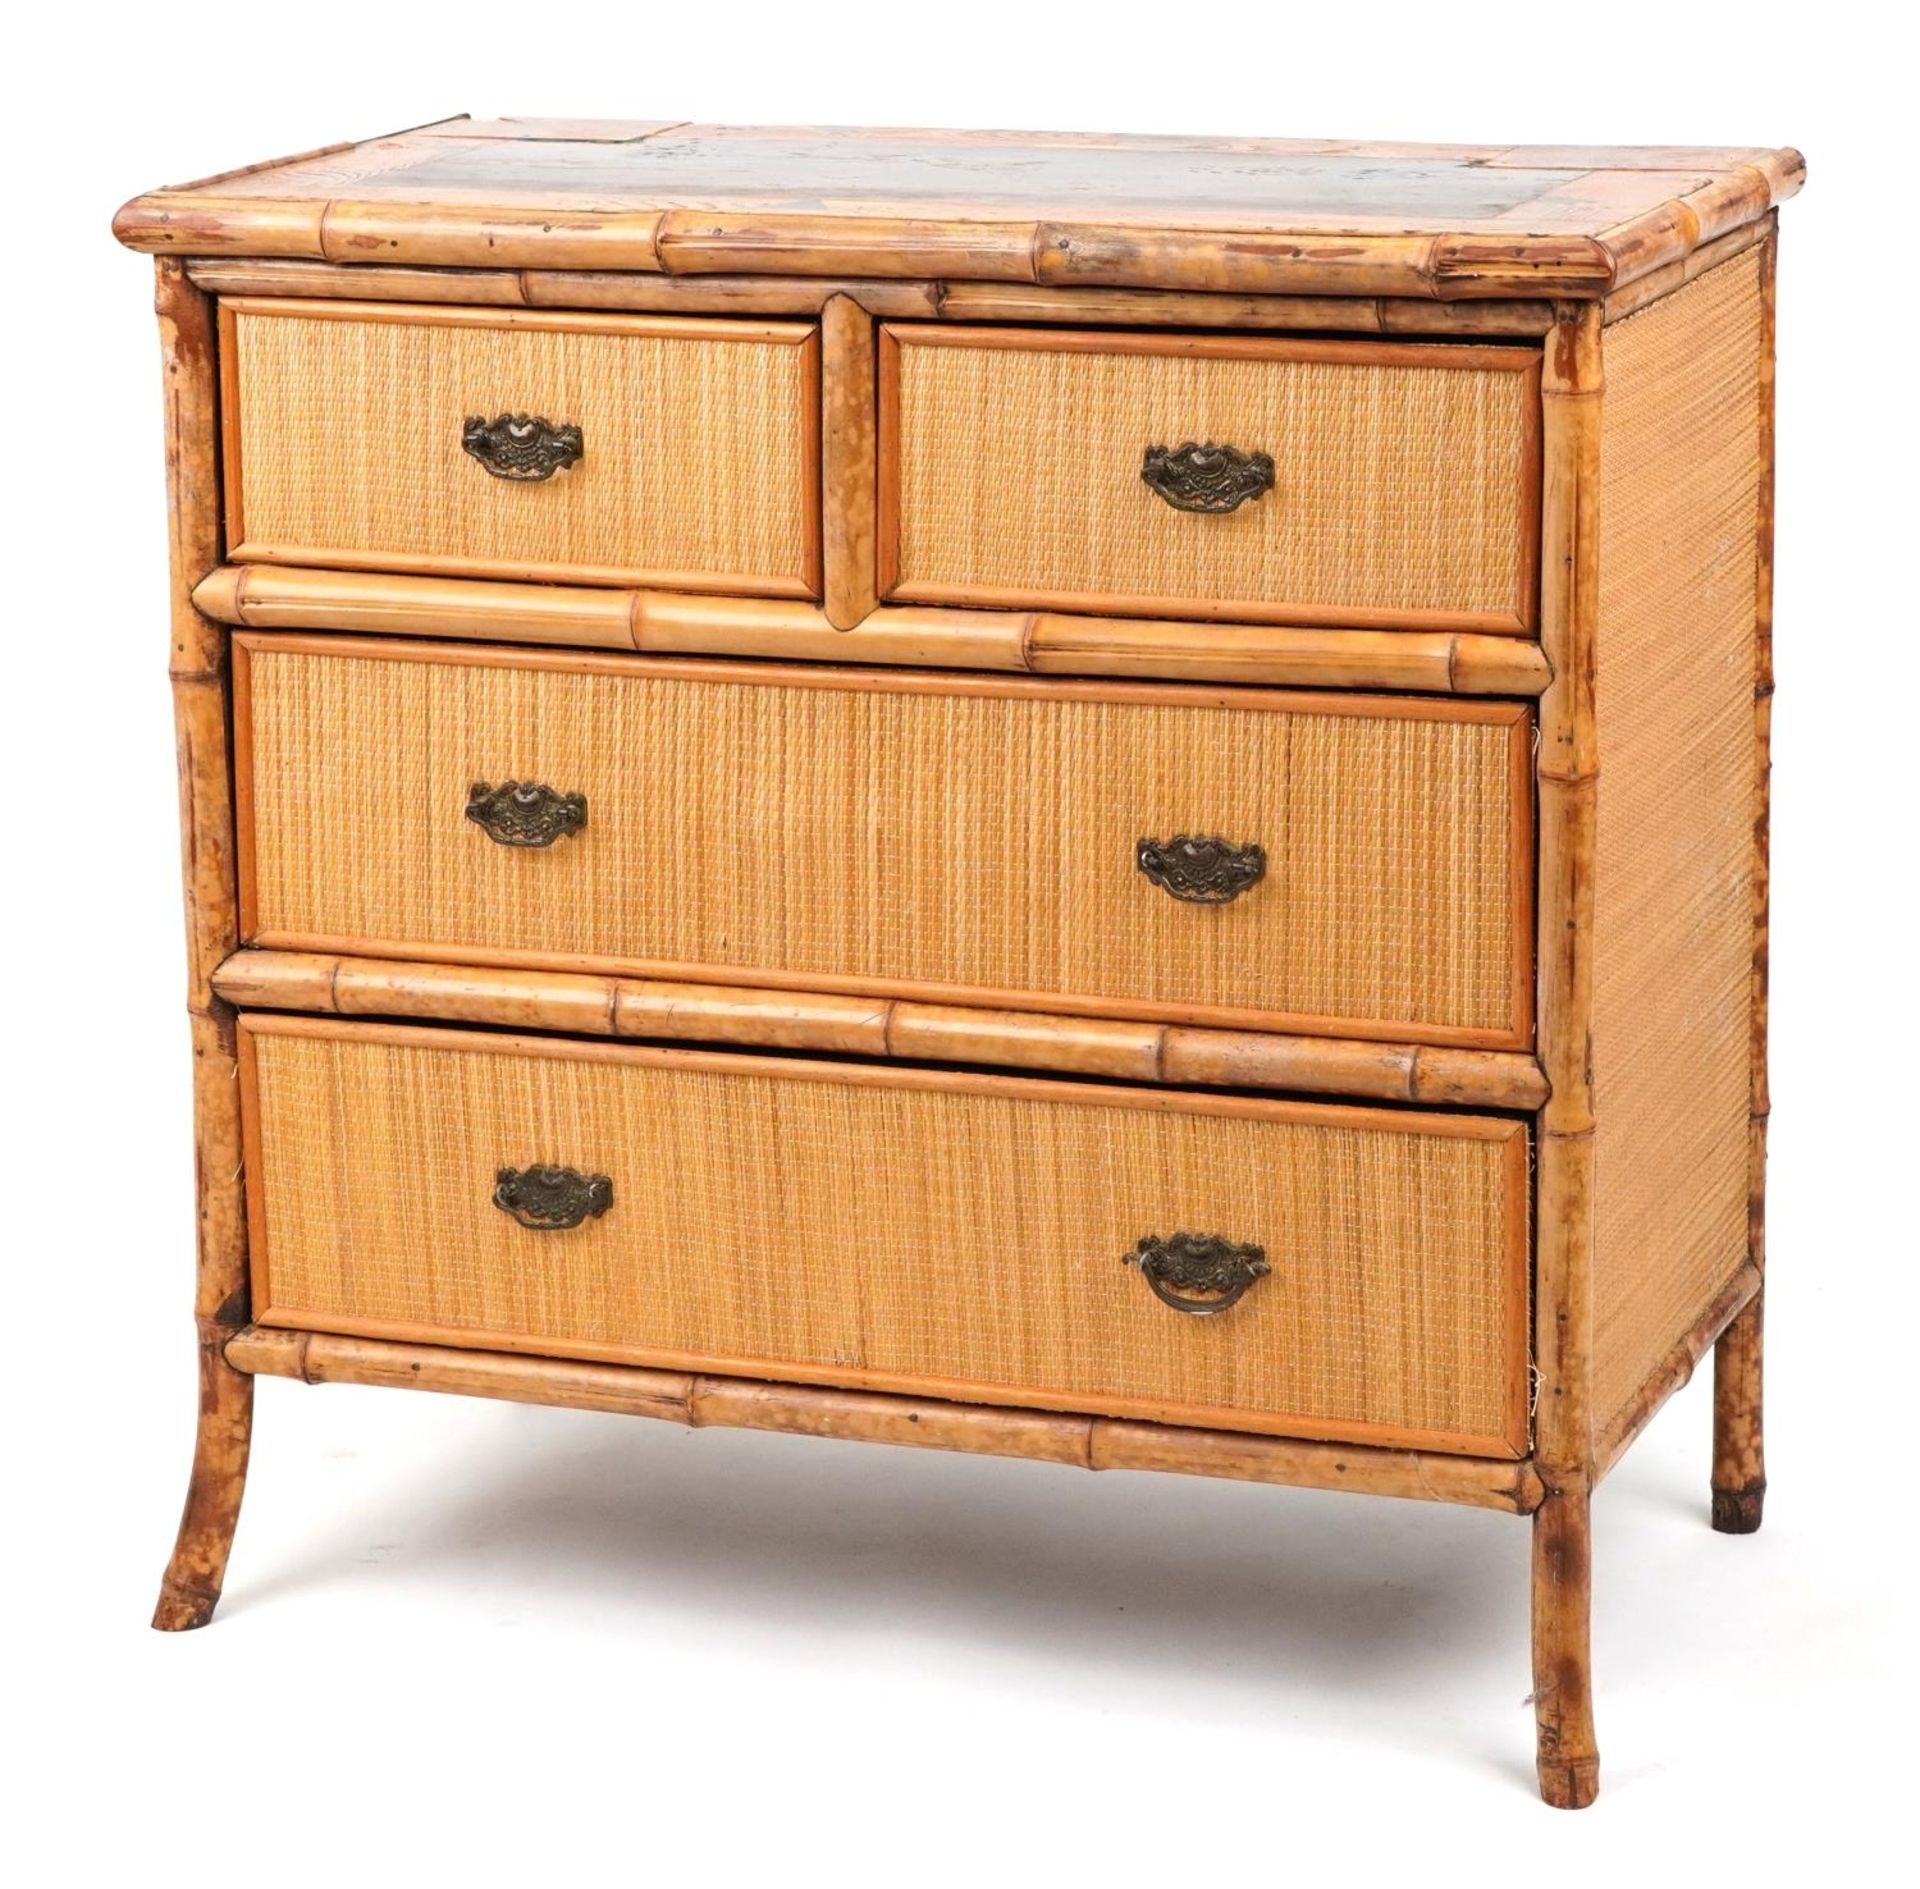 Victorian aesthetic bamboo four drawer chest with Japanned inlaid and lacquered top hand painted